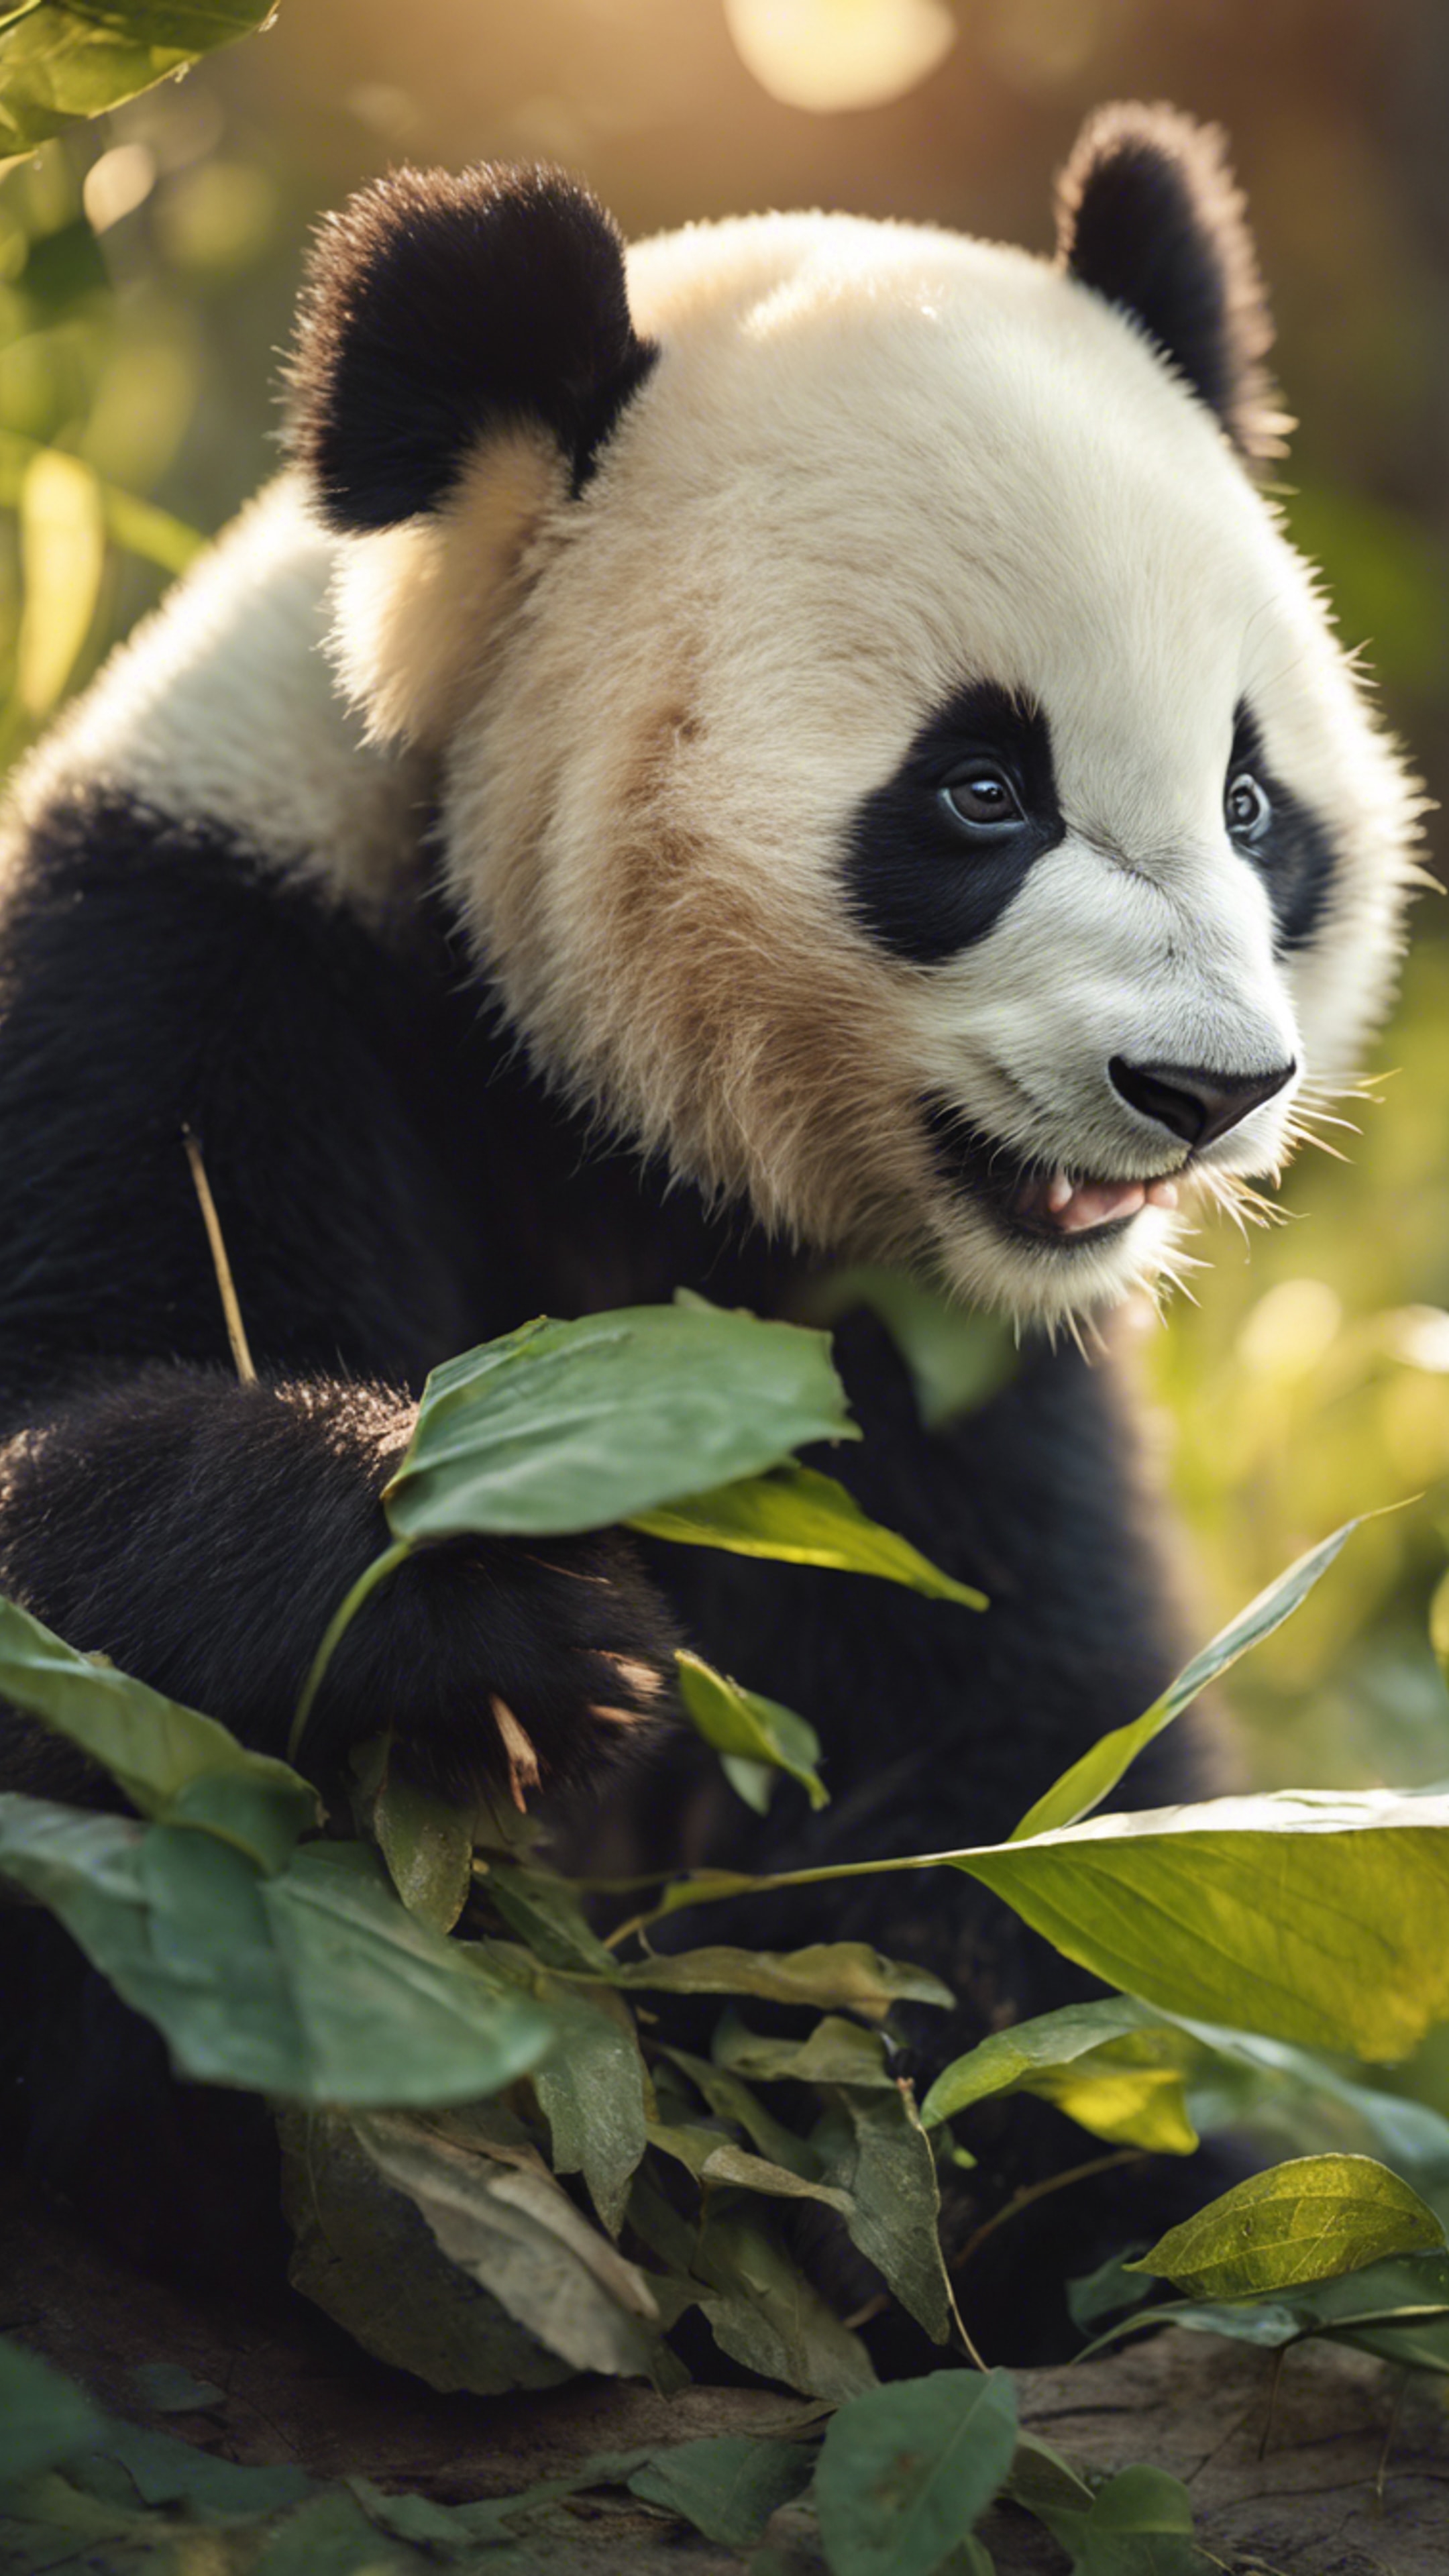 A young panda bear adorably nibbling on a leaf in the soft glow of morning light. Tapet[df98dc8ca776441d85bc]